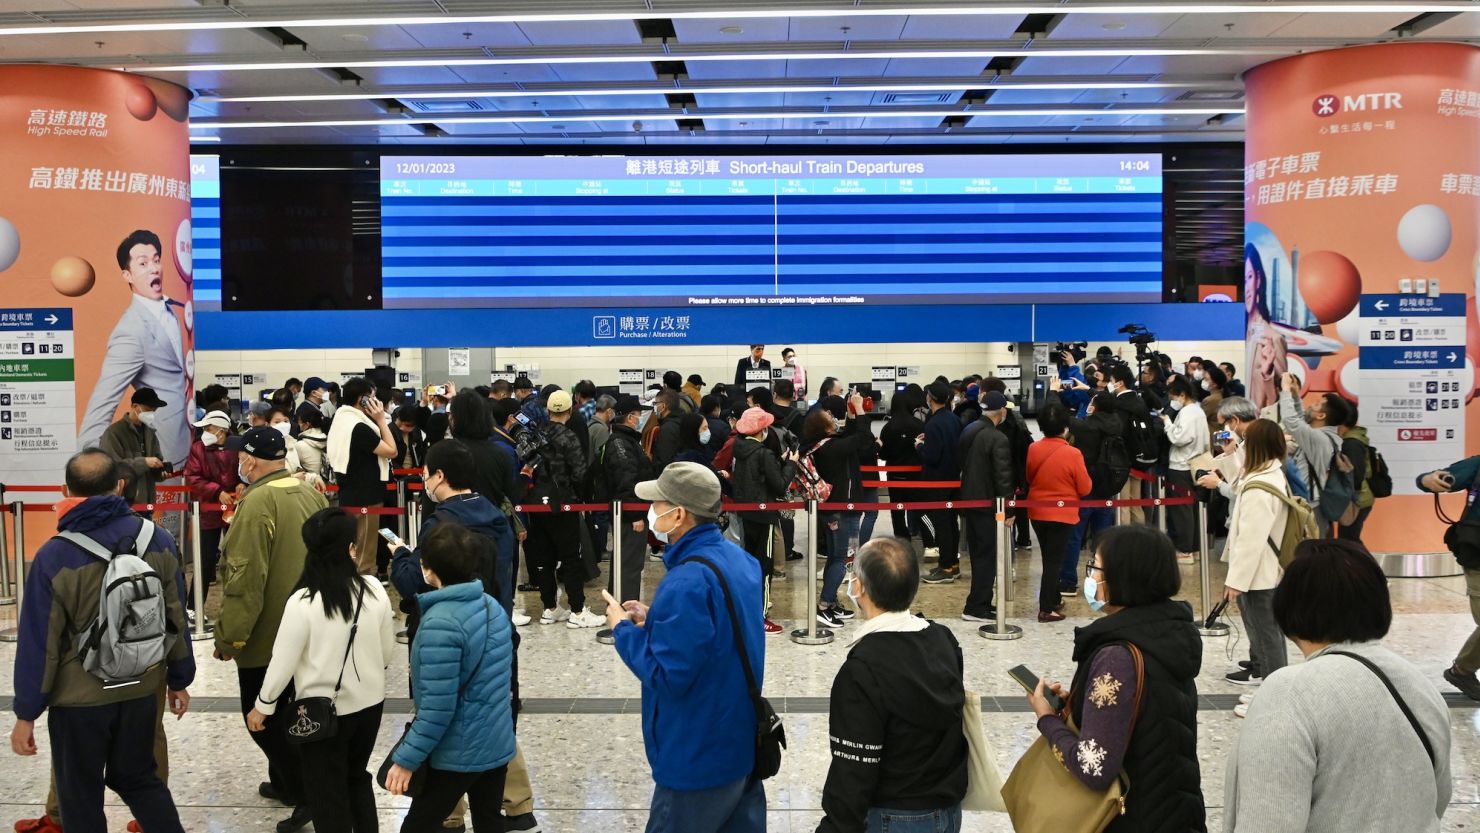 People line up to buy tickets at Hong Kong's West Kowloon Station on January 12, ahead of the resumption of the high-speed rail link.